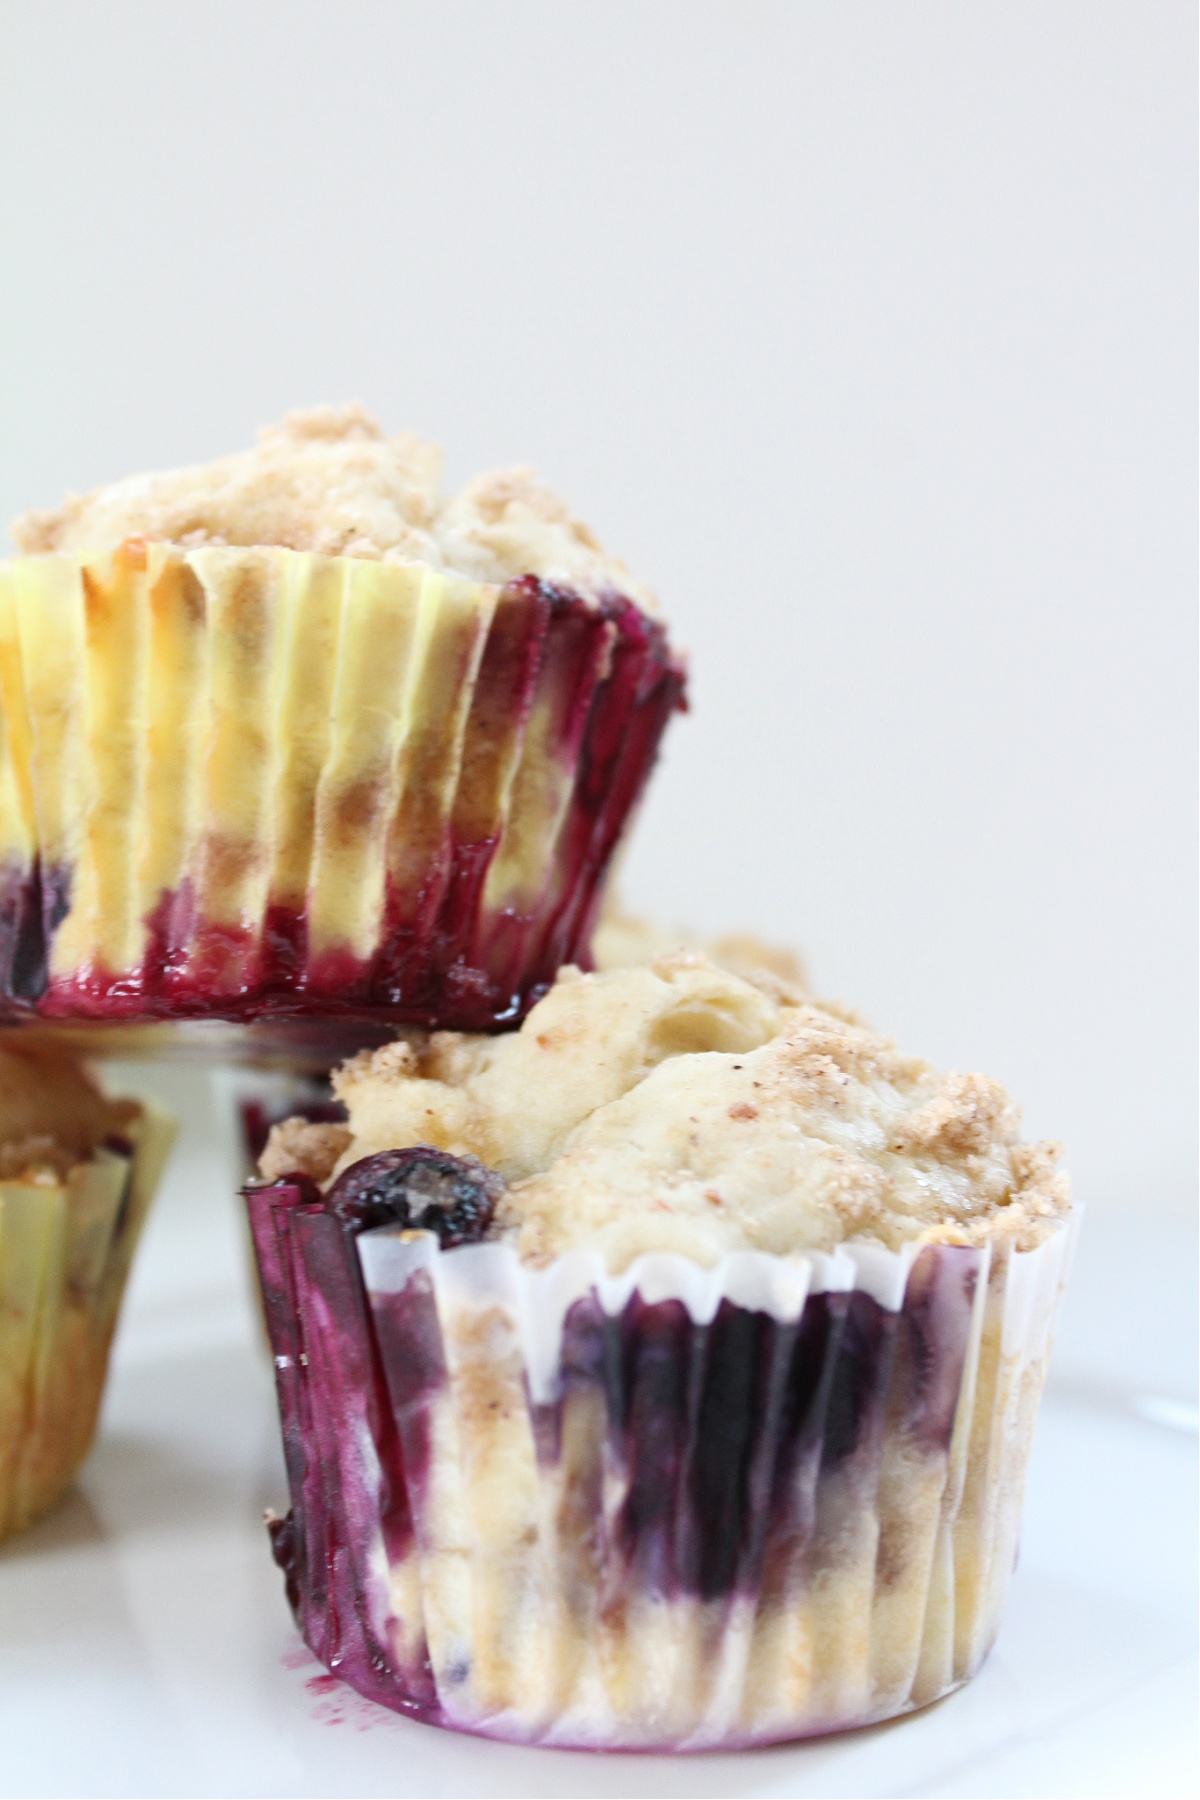 Tasty Blueberry Muffins with Streusel Topping